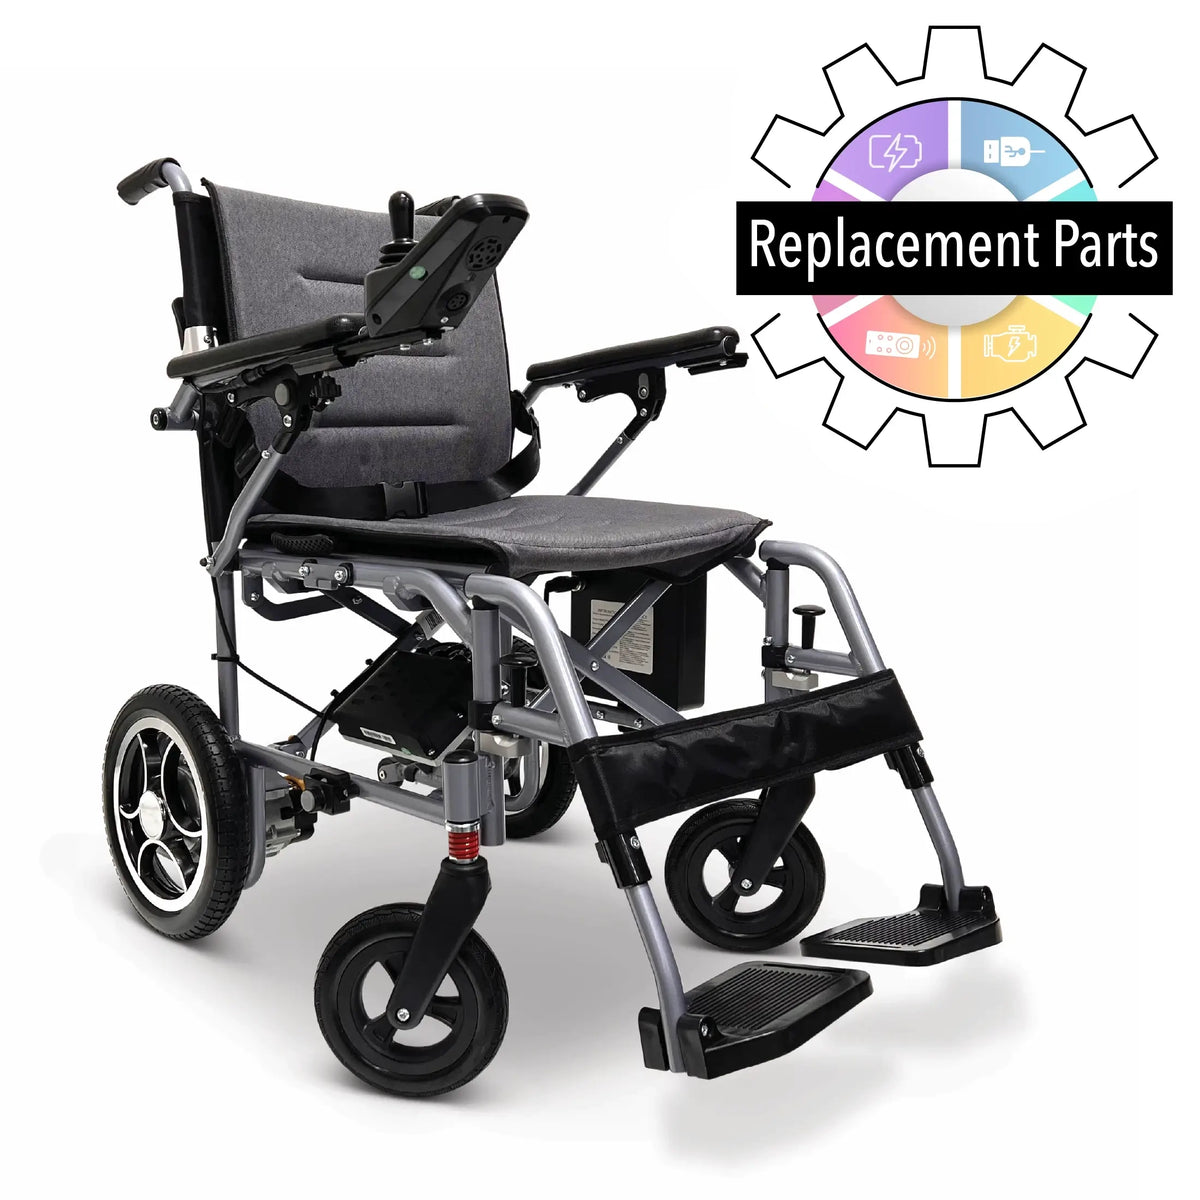 X-7 Electric Wheelchair Replacement Parts